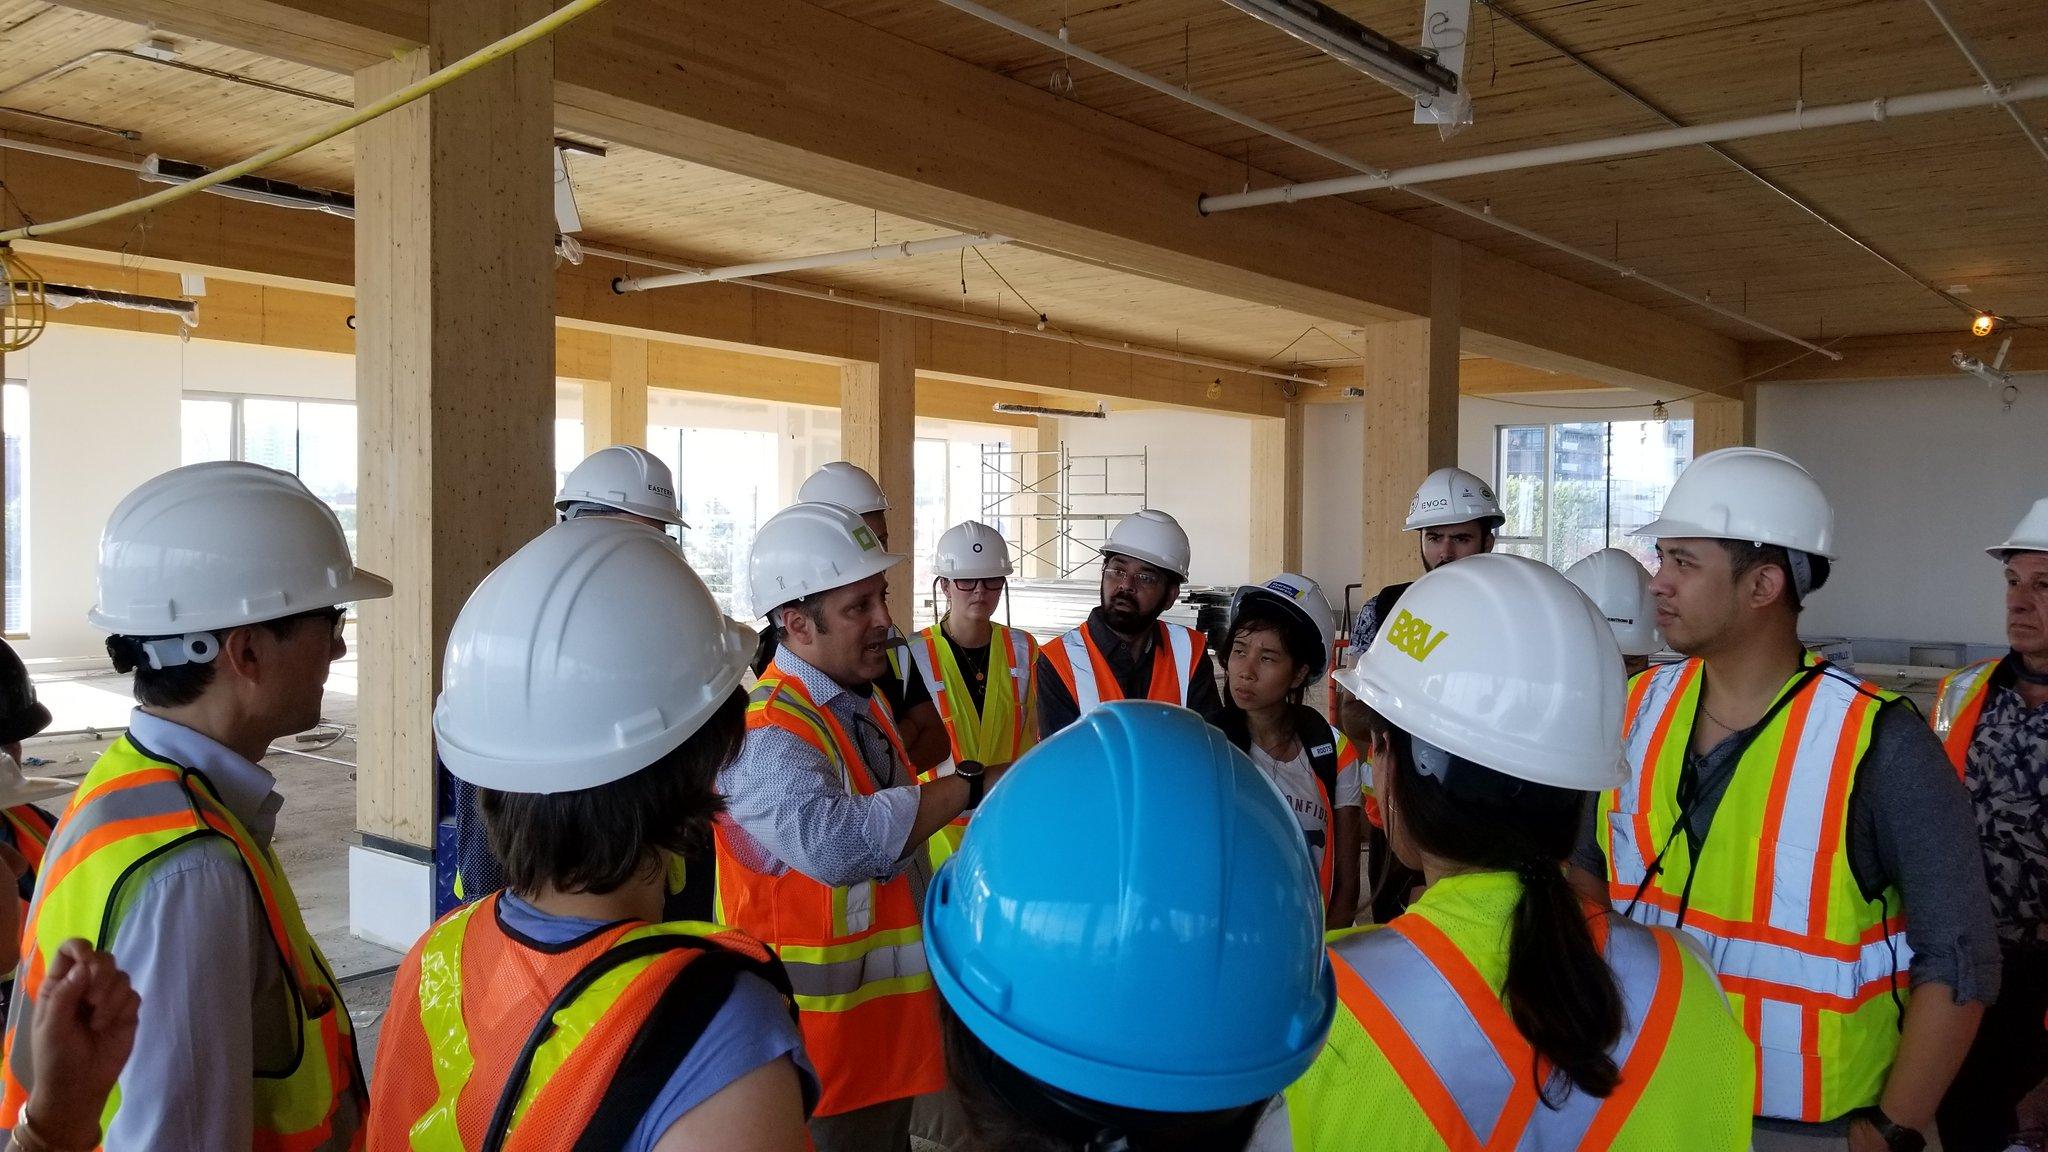 Richard Witt explaining something to a group of people wearing construction site safety gear in an unfinished floor of 80 Atlantic that features exposed wood ceilings and columns